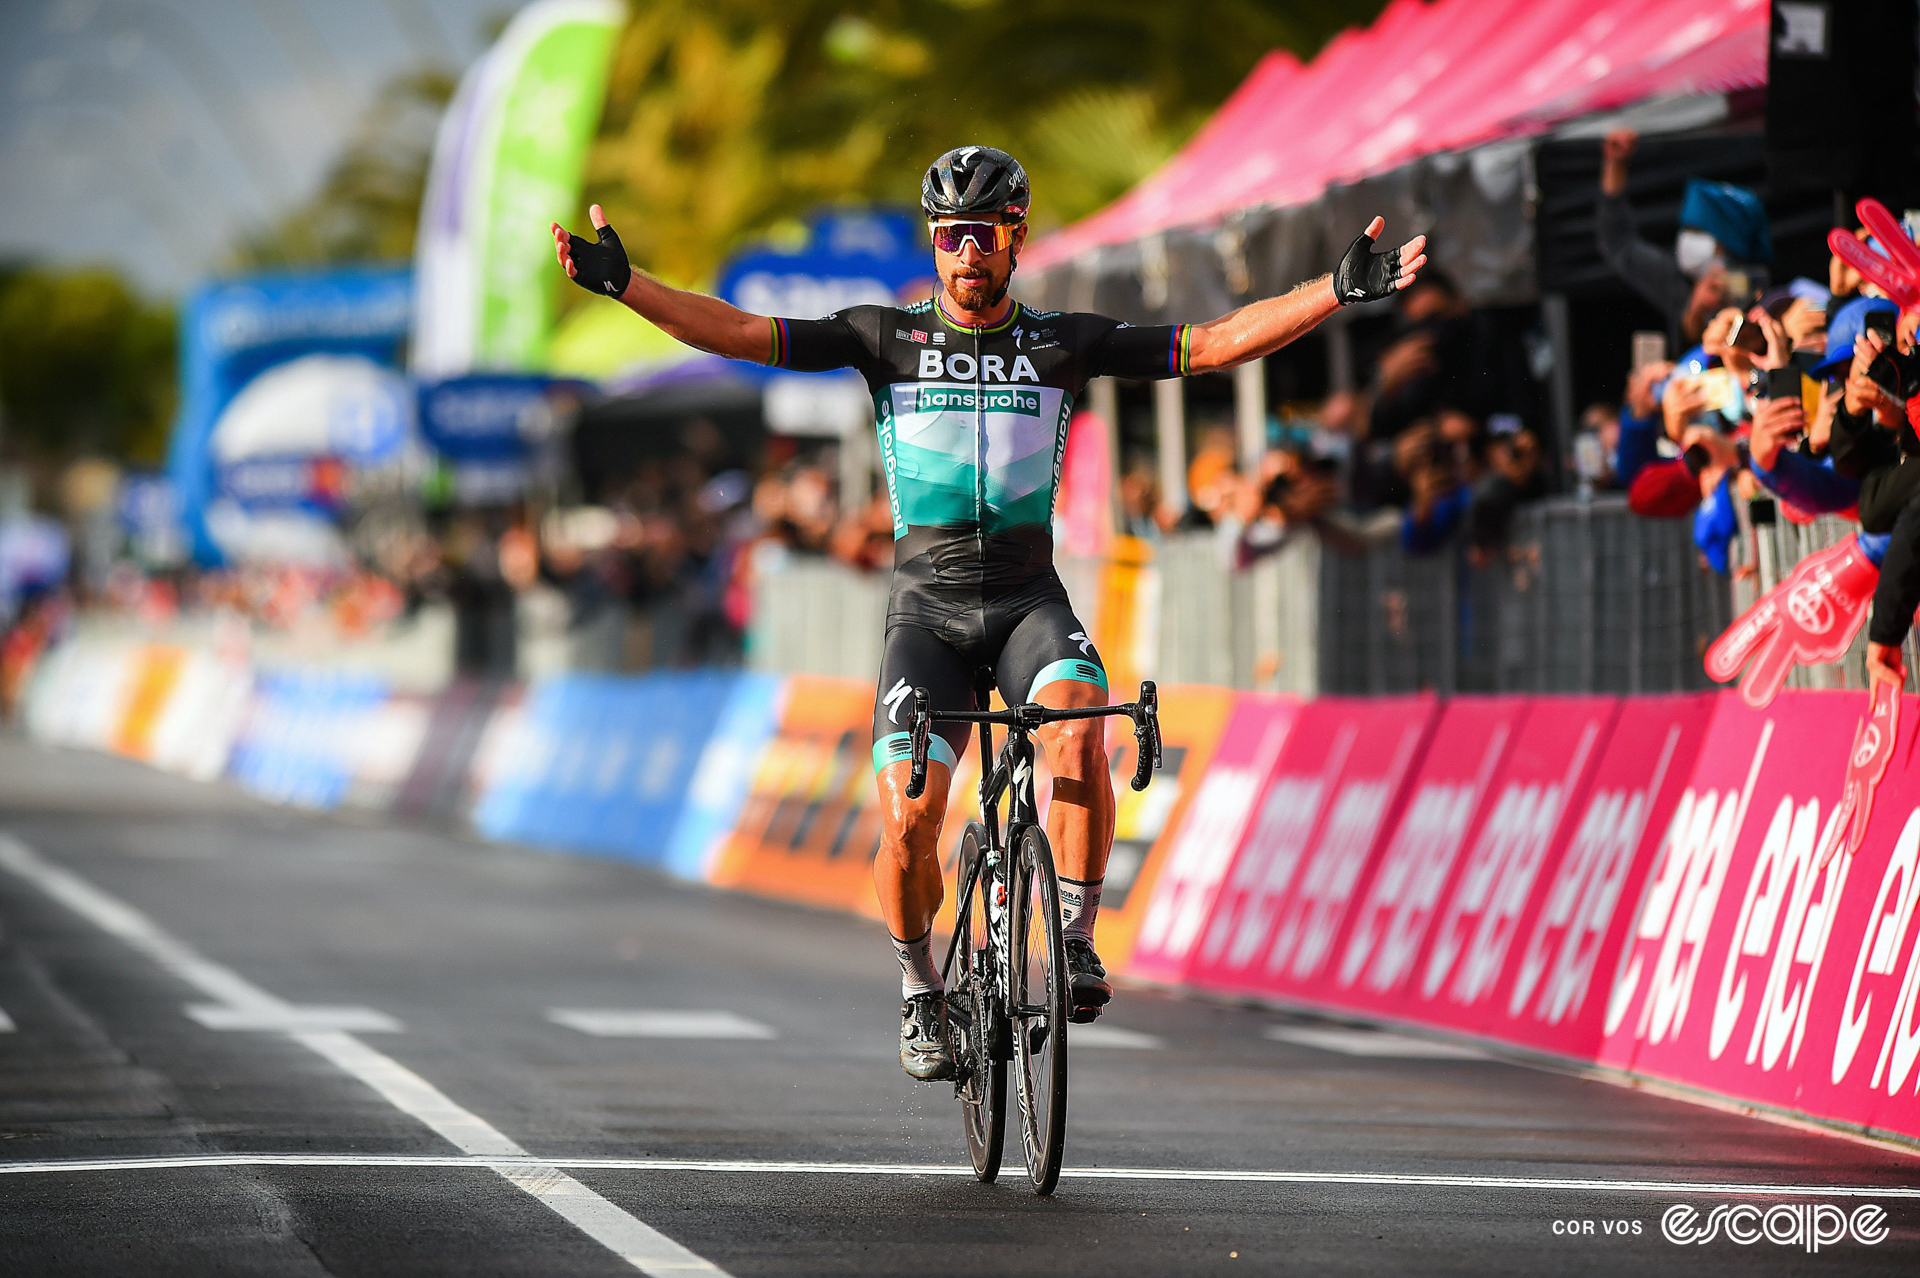 Peter Sagan celebrates winning a stage at the 2020 Giro d'Italia, with arms outstretched. He's the only rider in frame.